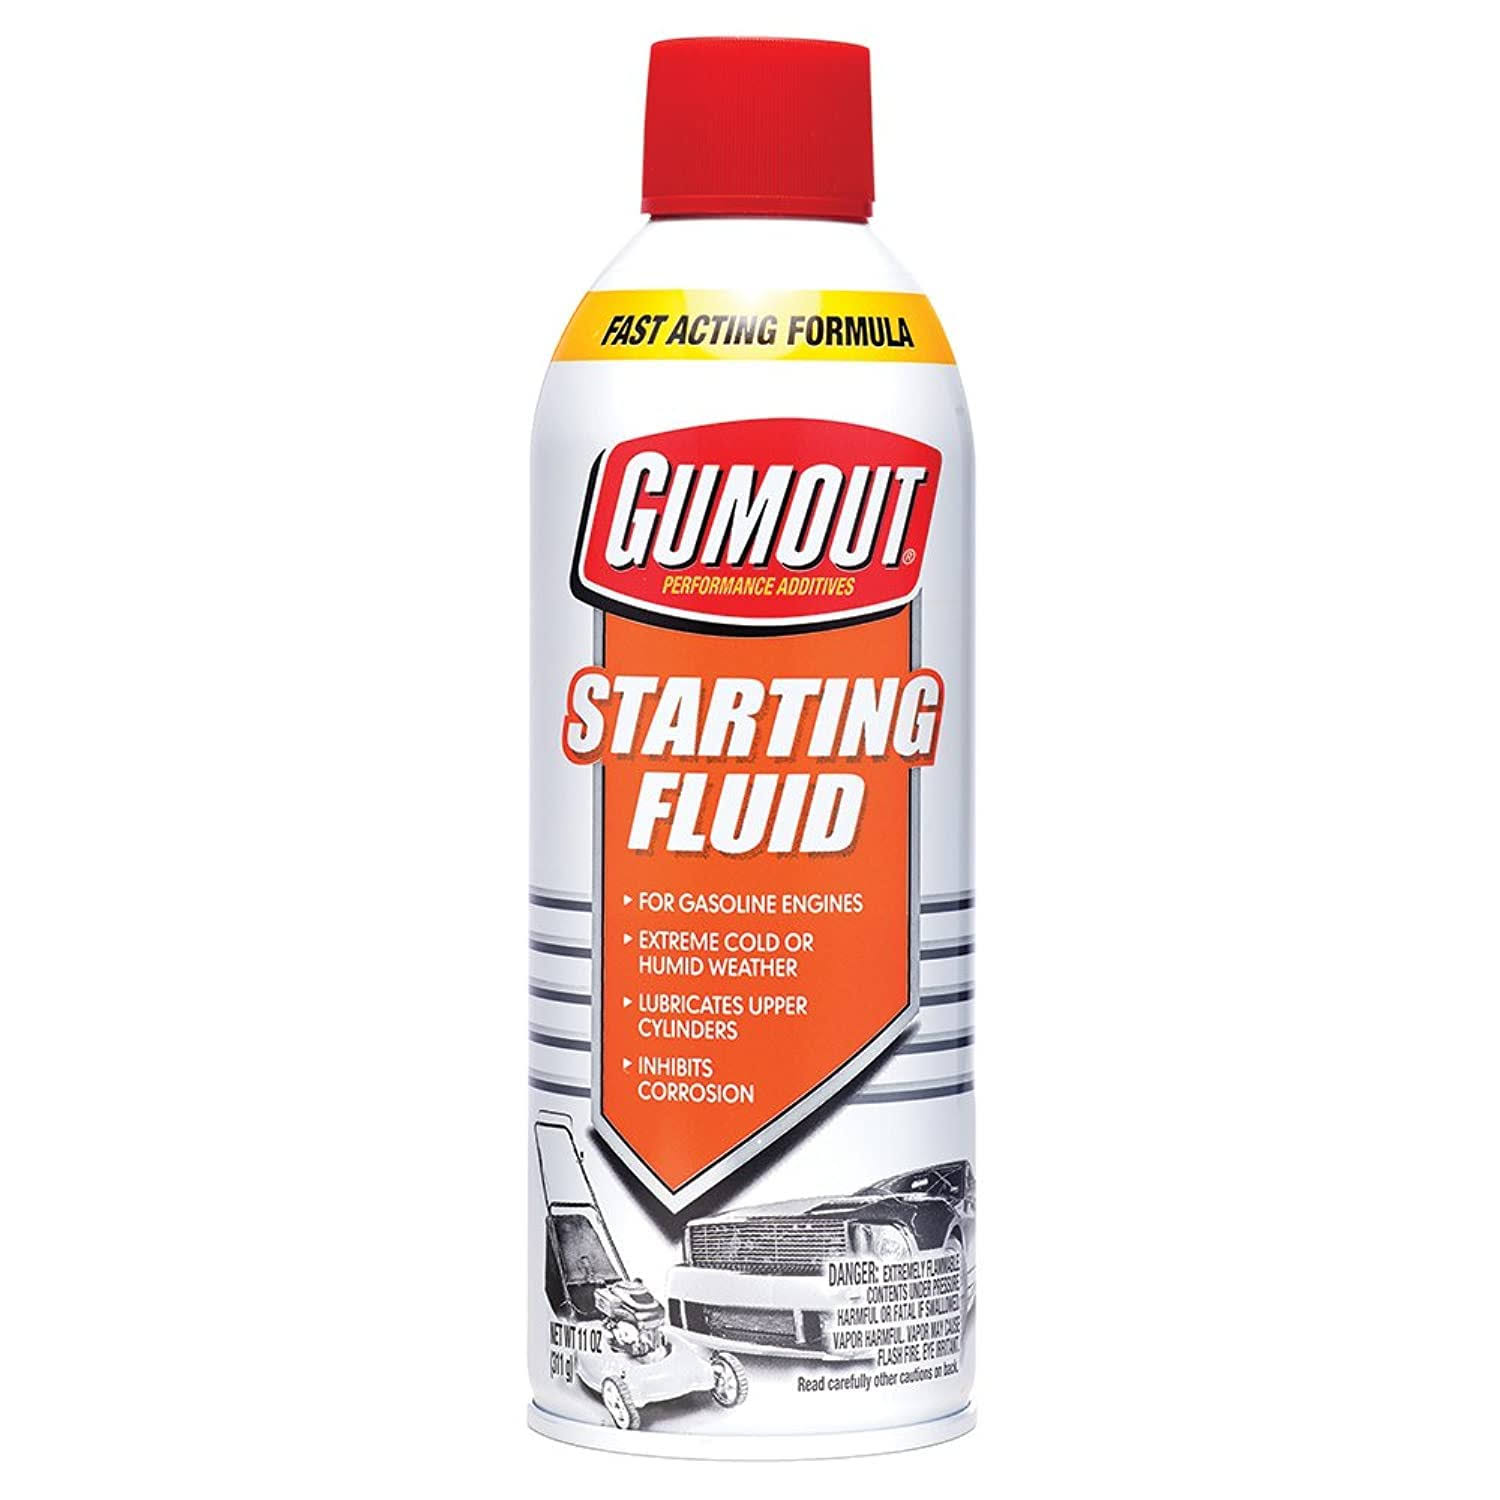 Itw Global Brands Gumout Starting Fluid - 11oz